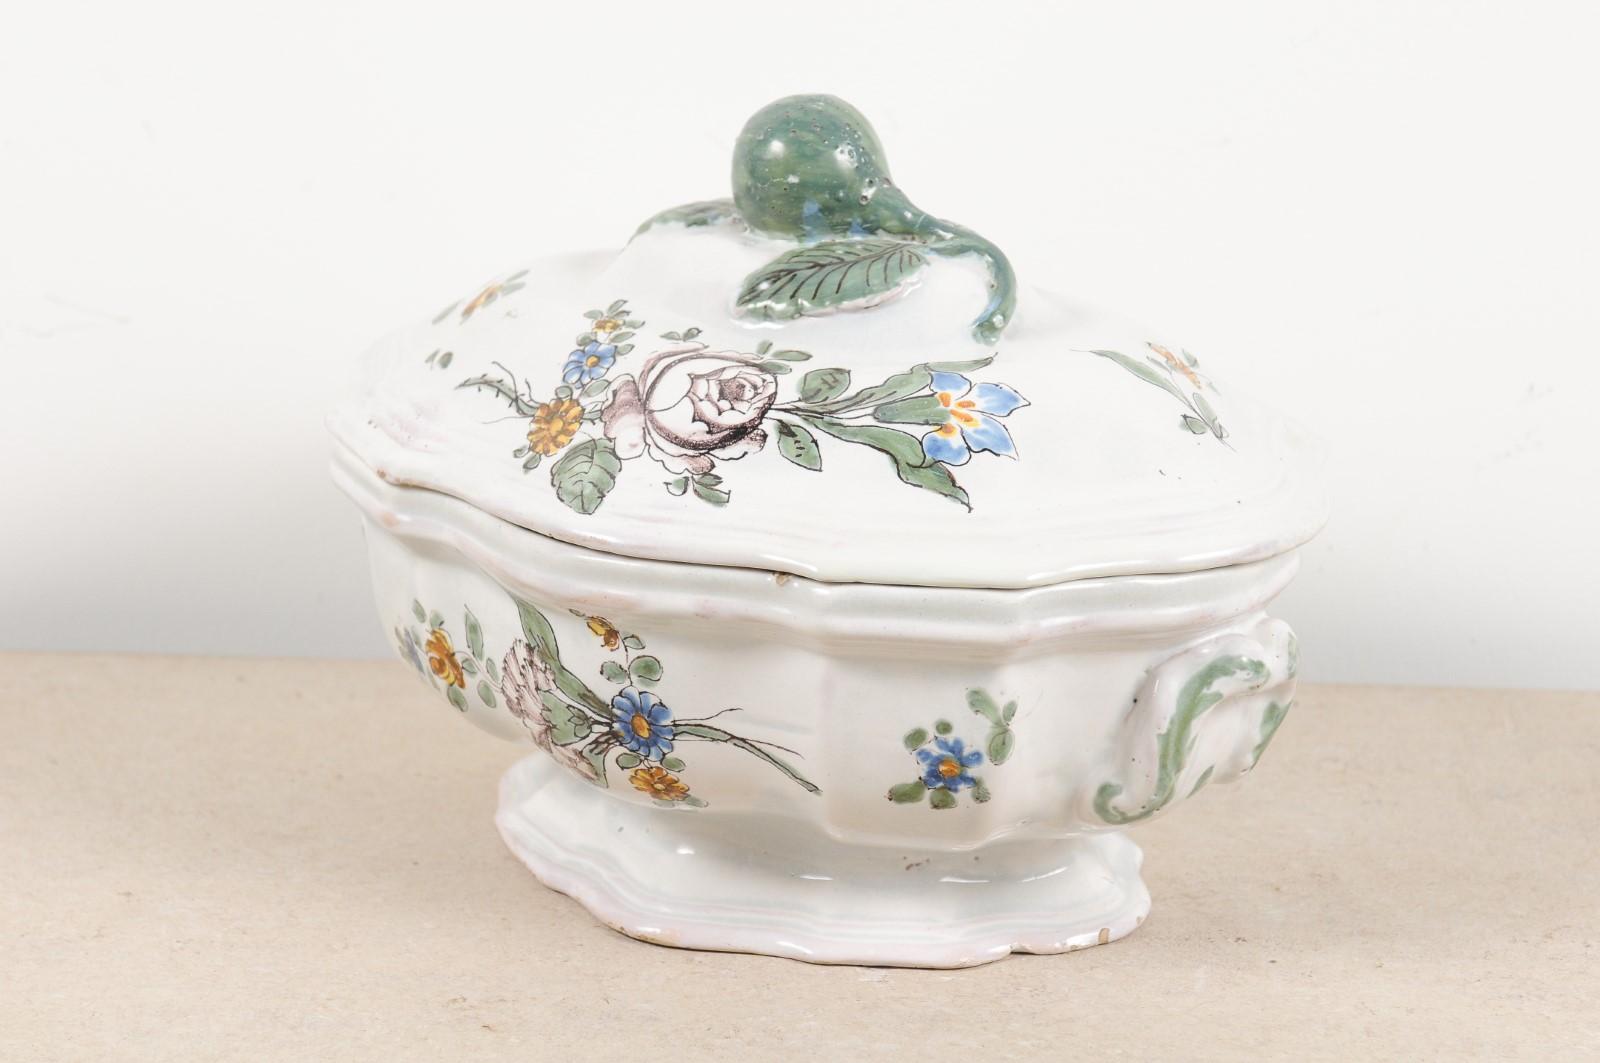 French 1750s Faience Oval Shaped Soup Tureen from Bordeaux with Floral Decor For Sale 4